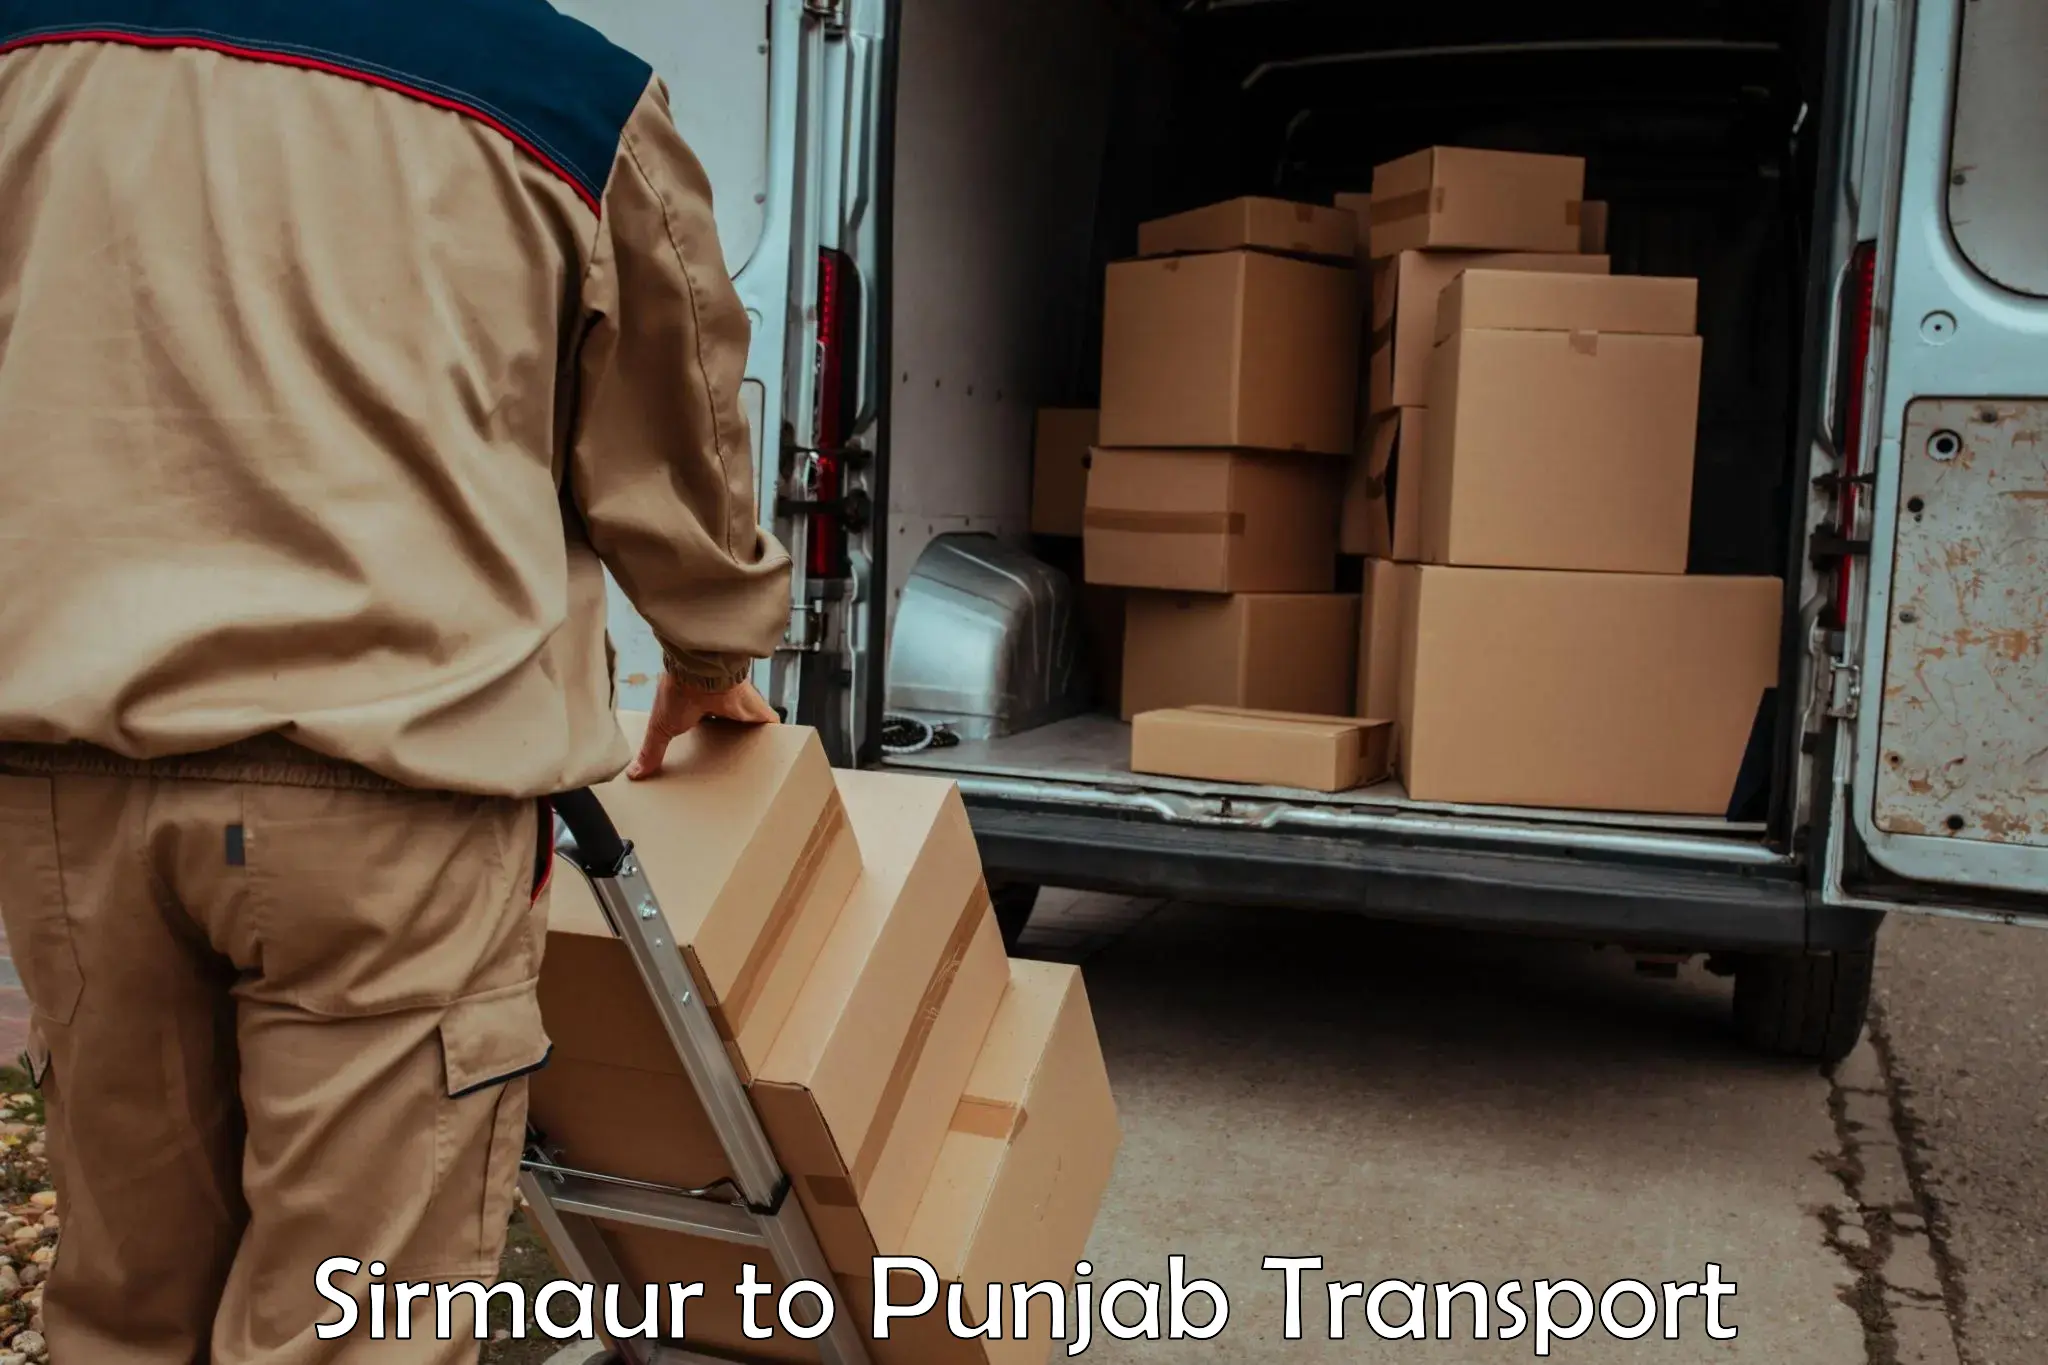 Commercial transport service Sirmaur to Ludhiana